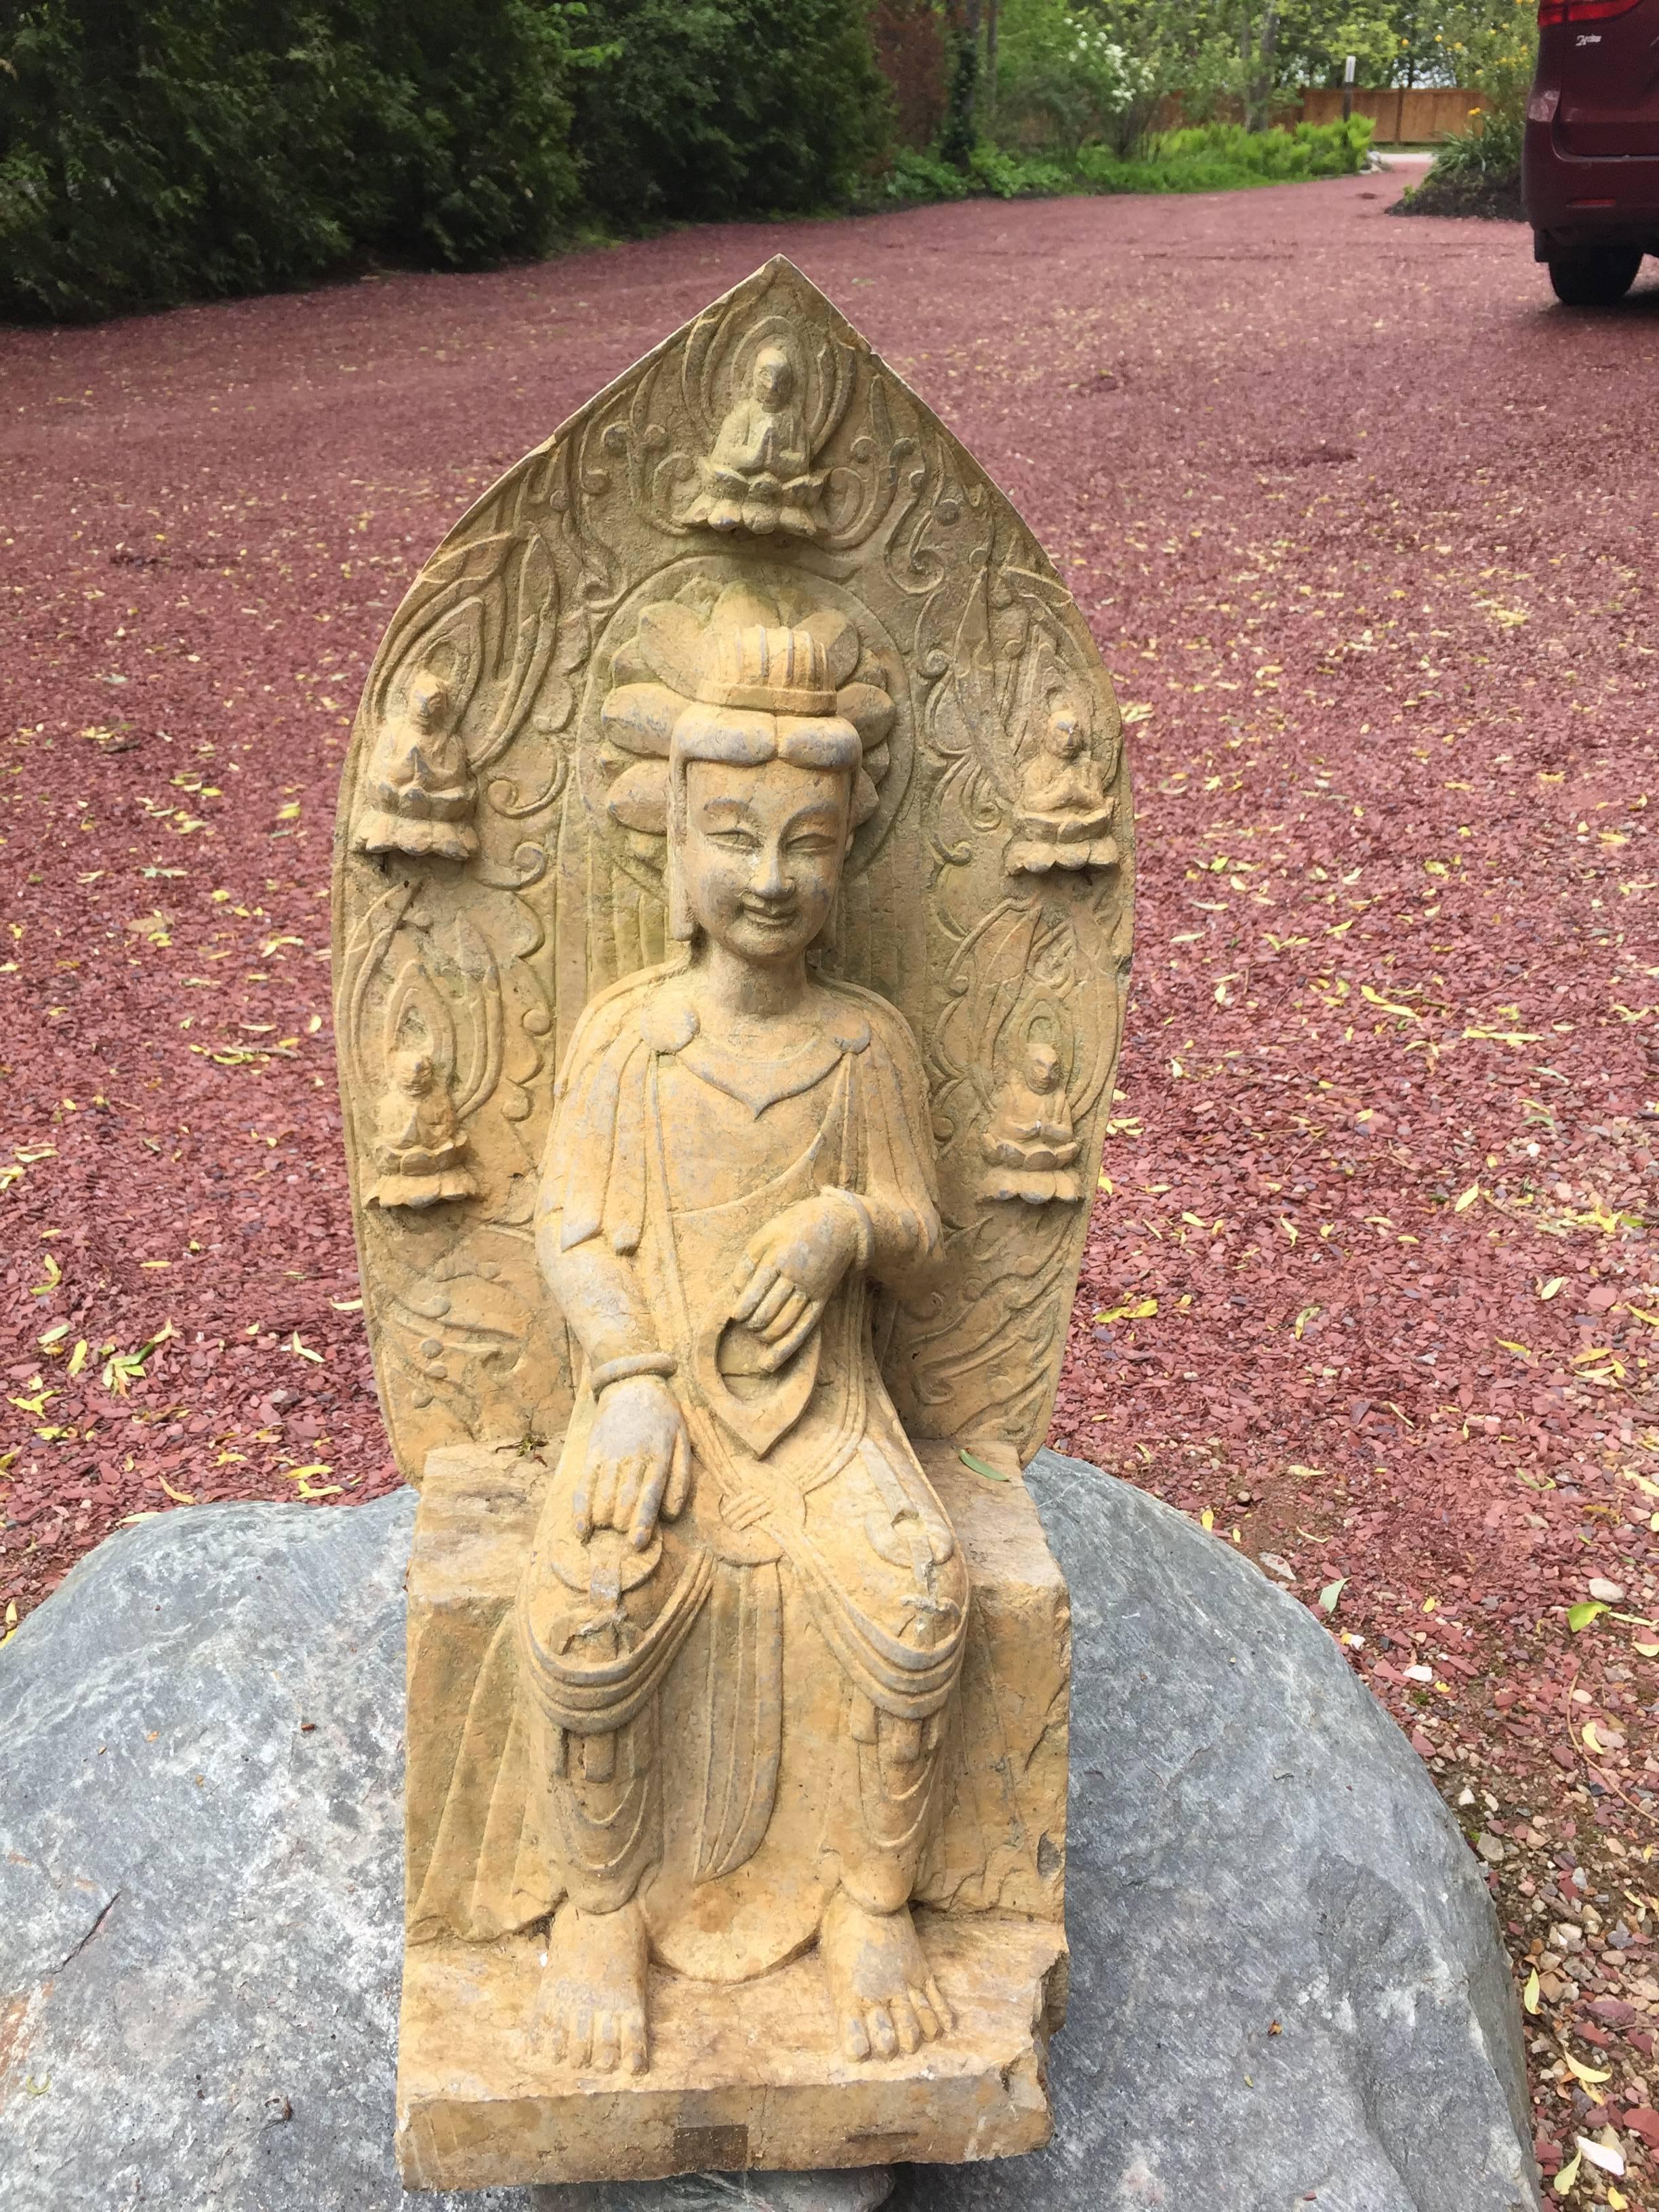 Hand-Crafted Old Garden Stone Guan Yin Buddha with Lovely Face